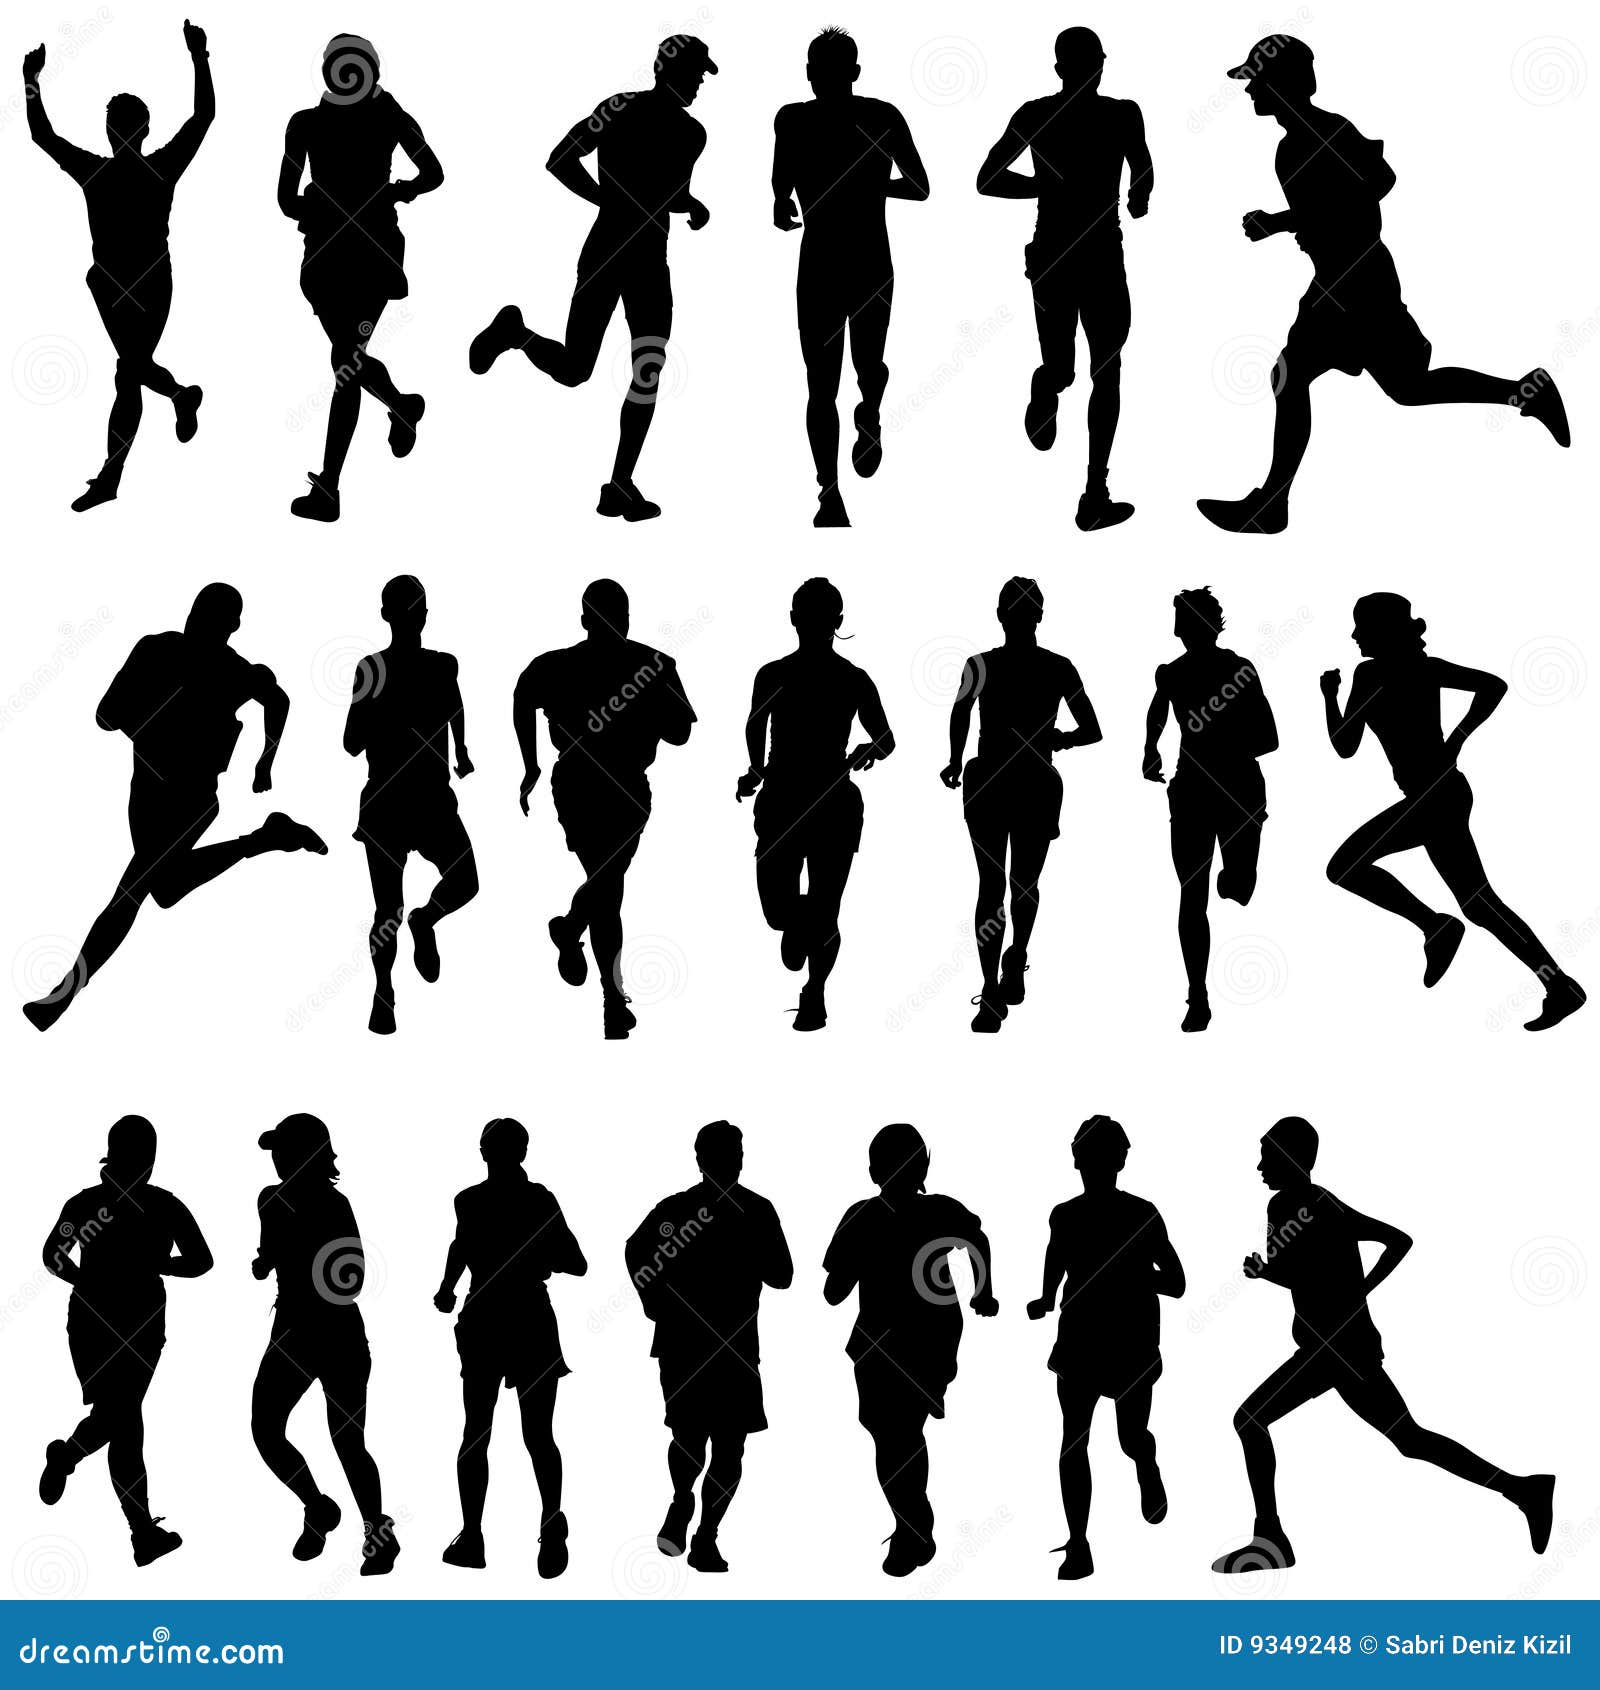 free vector clipart runners - photo #41